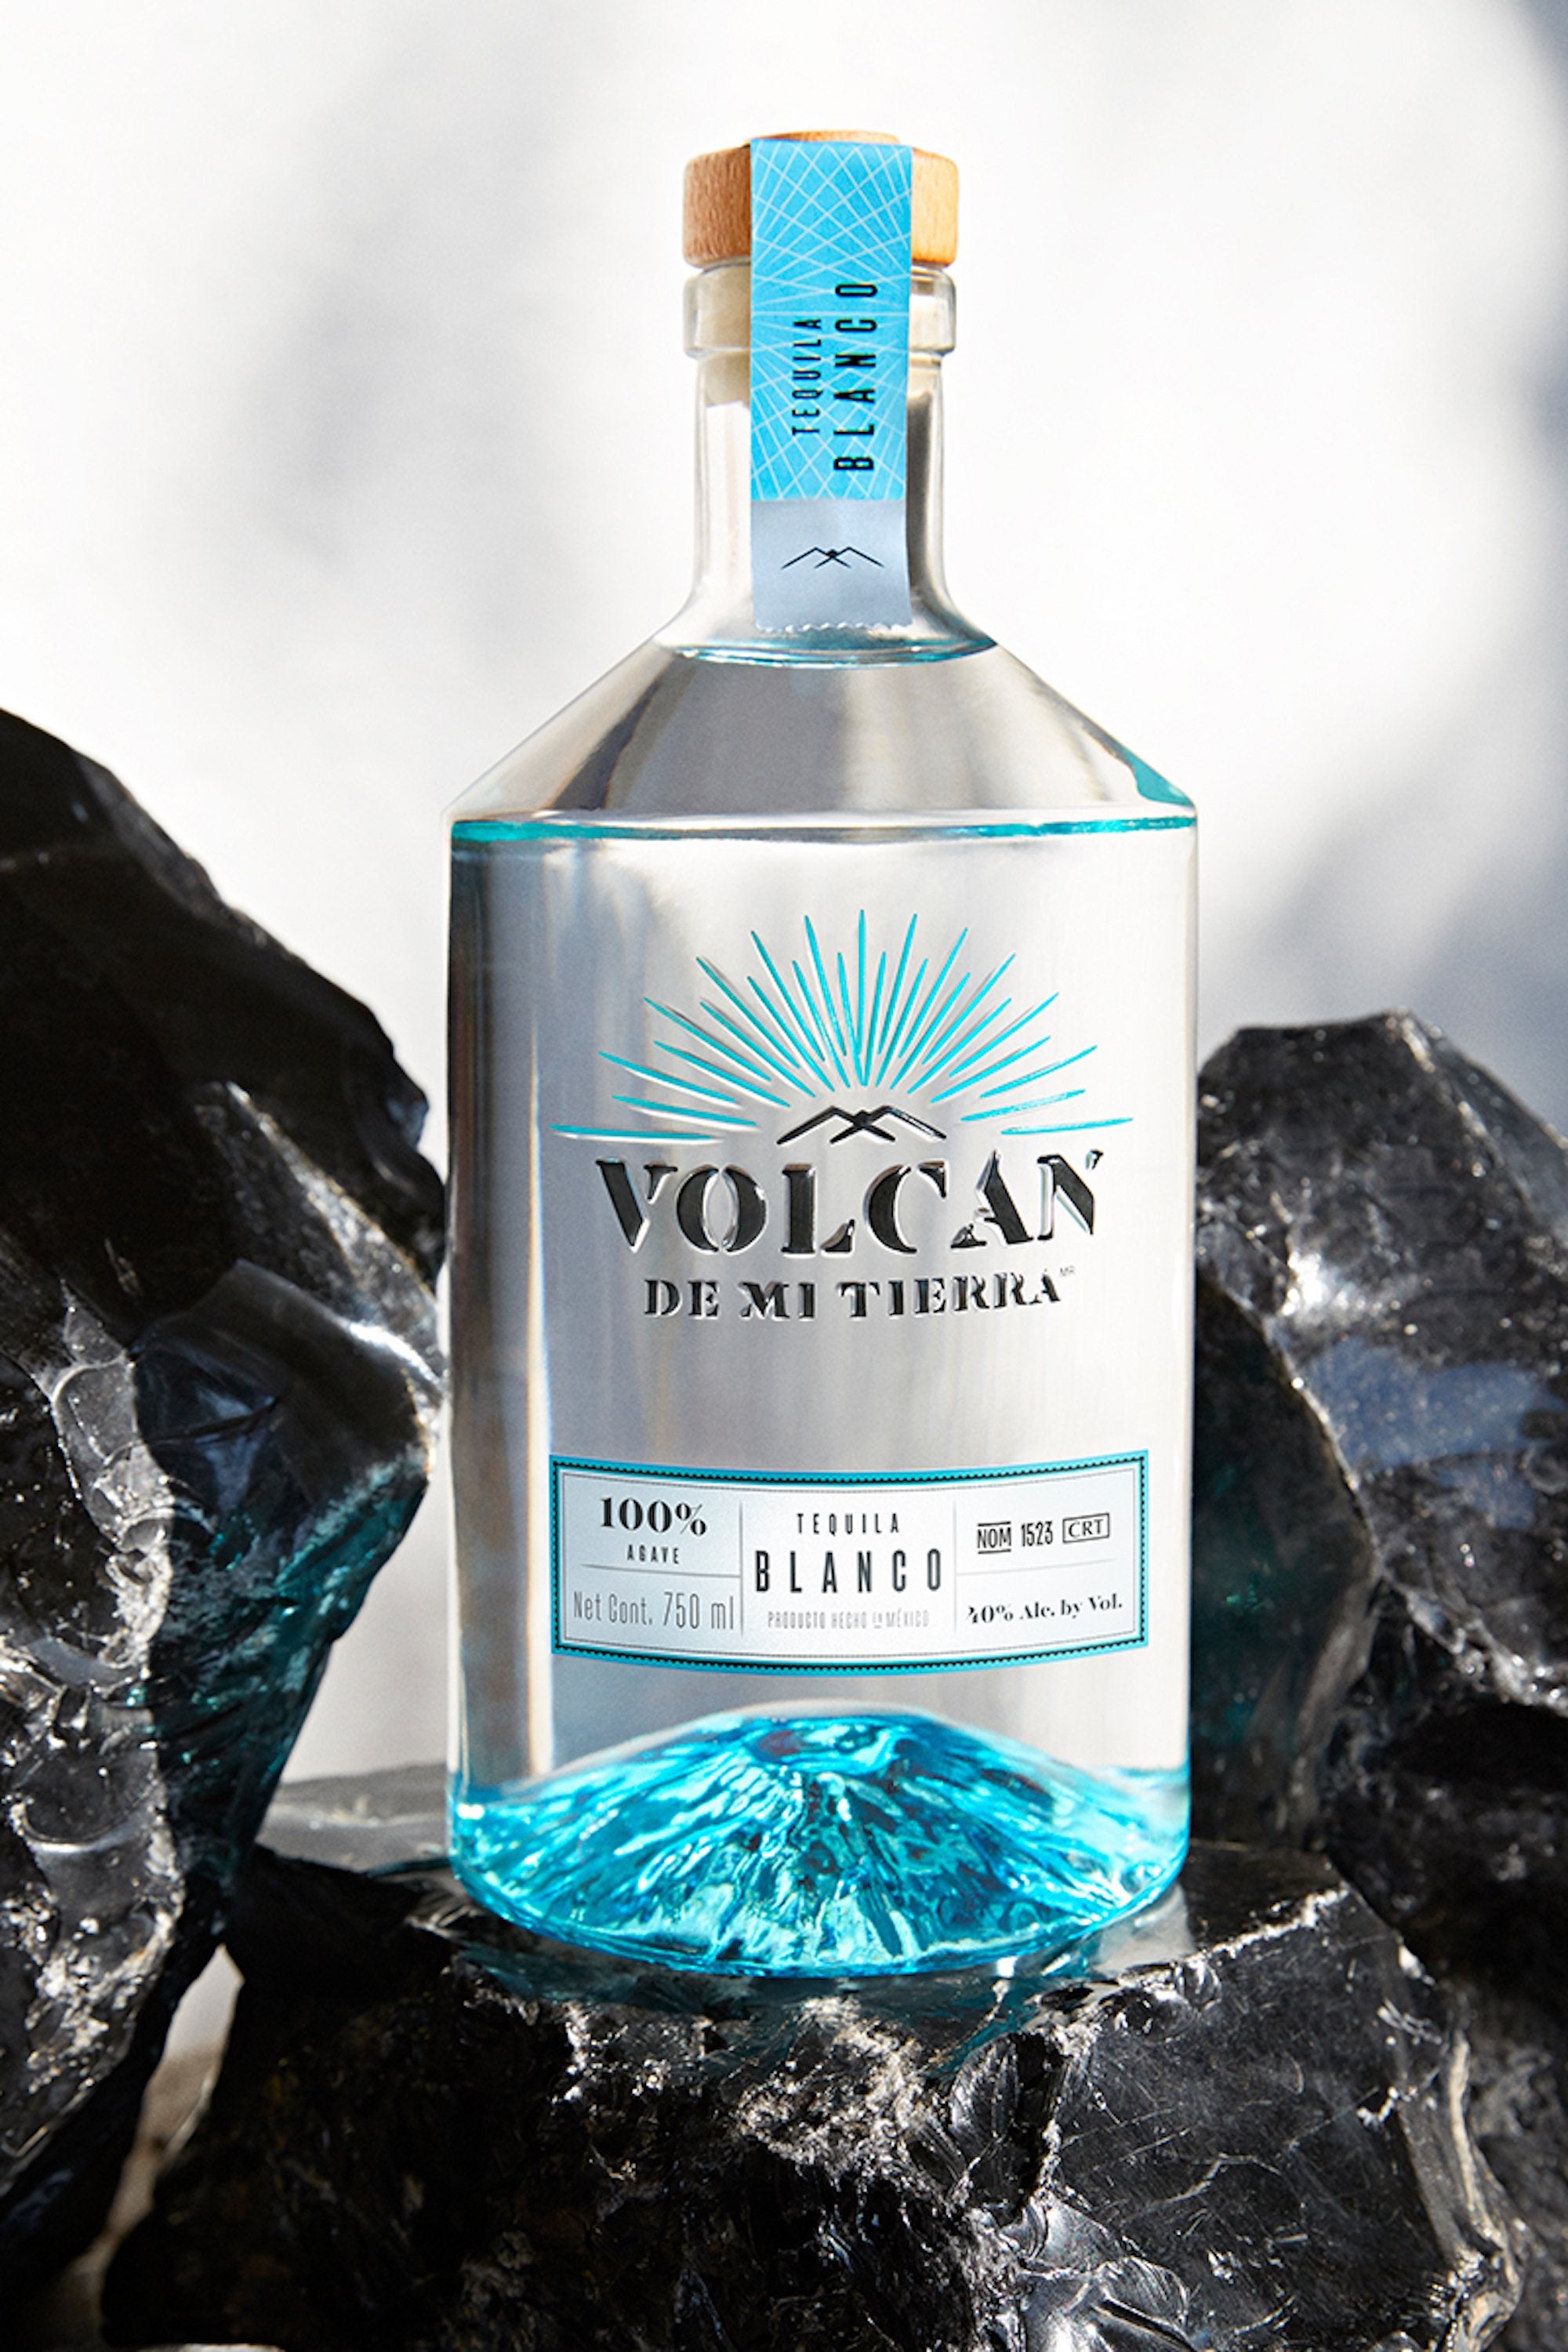 Volcan X.A Tequila Arrives on the Consumer Market